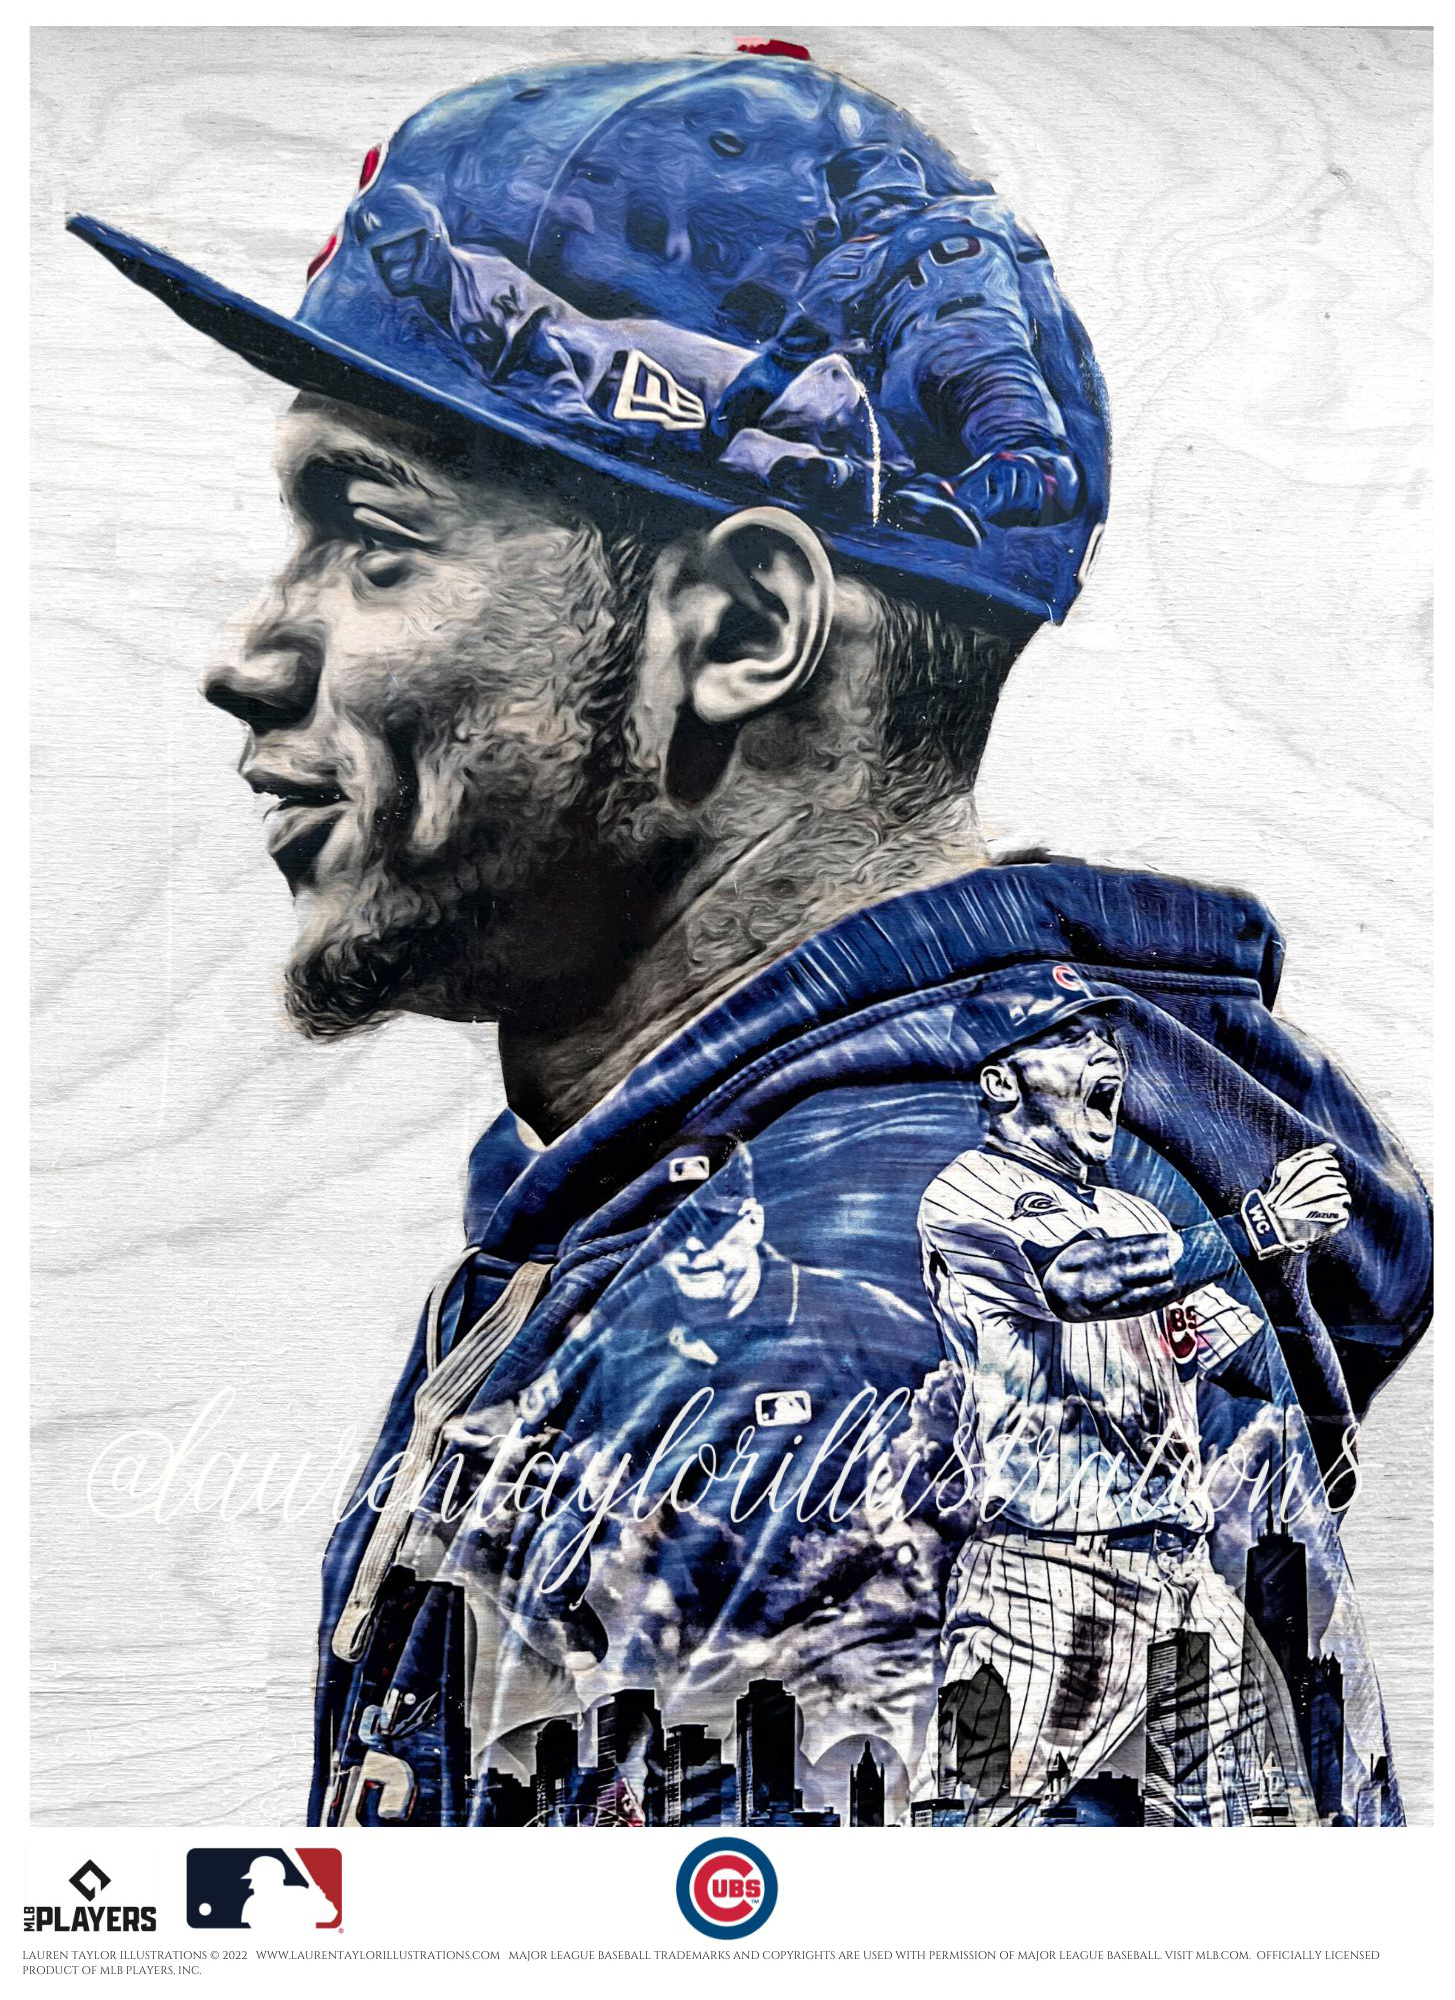 Willson Contreras Caricature Shirt and Hoodie - Chicago Cubs